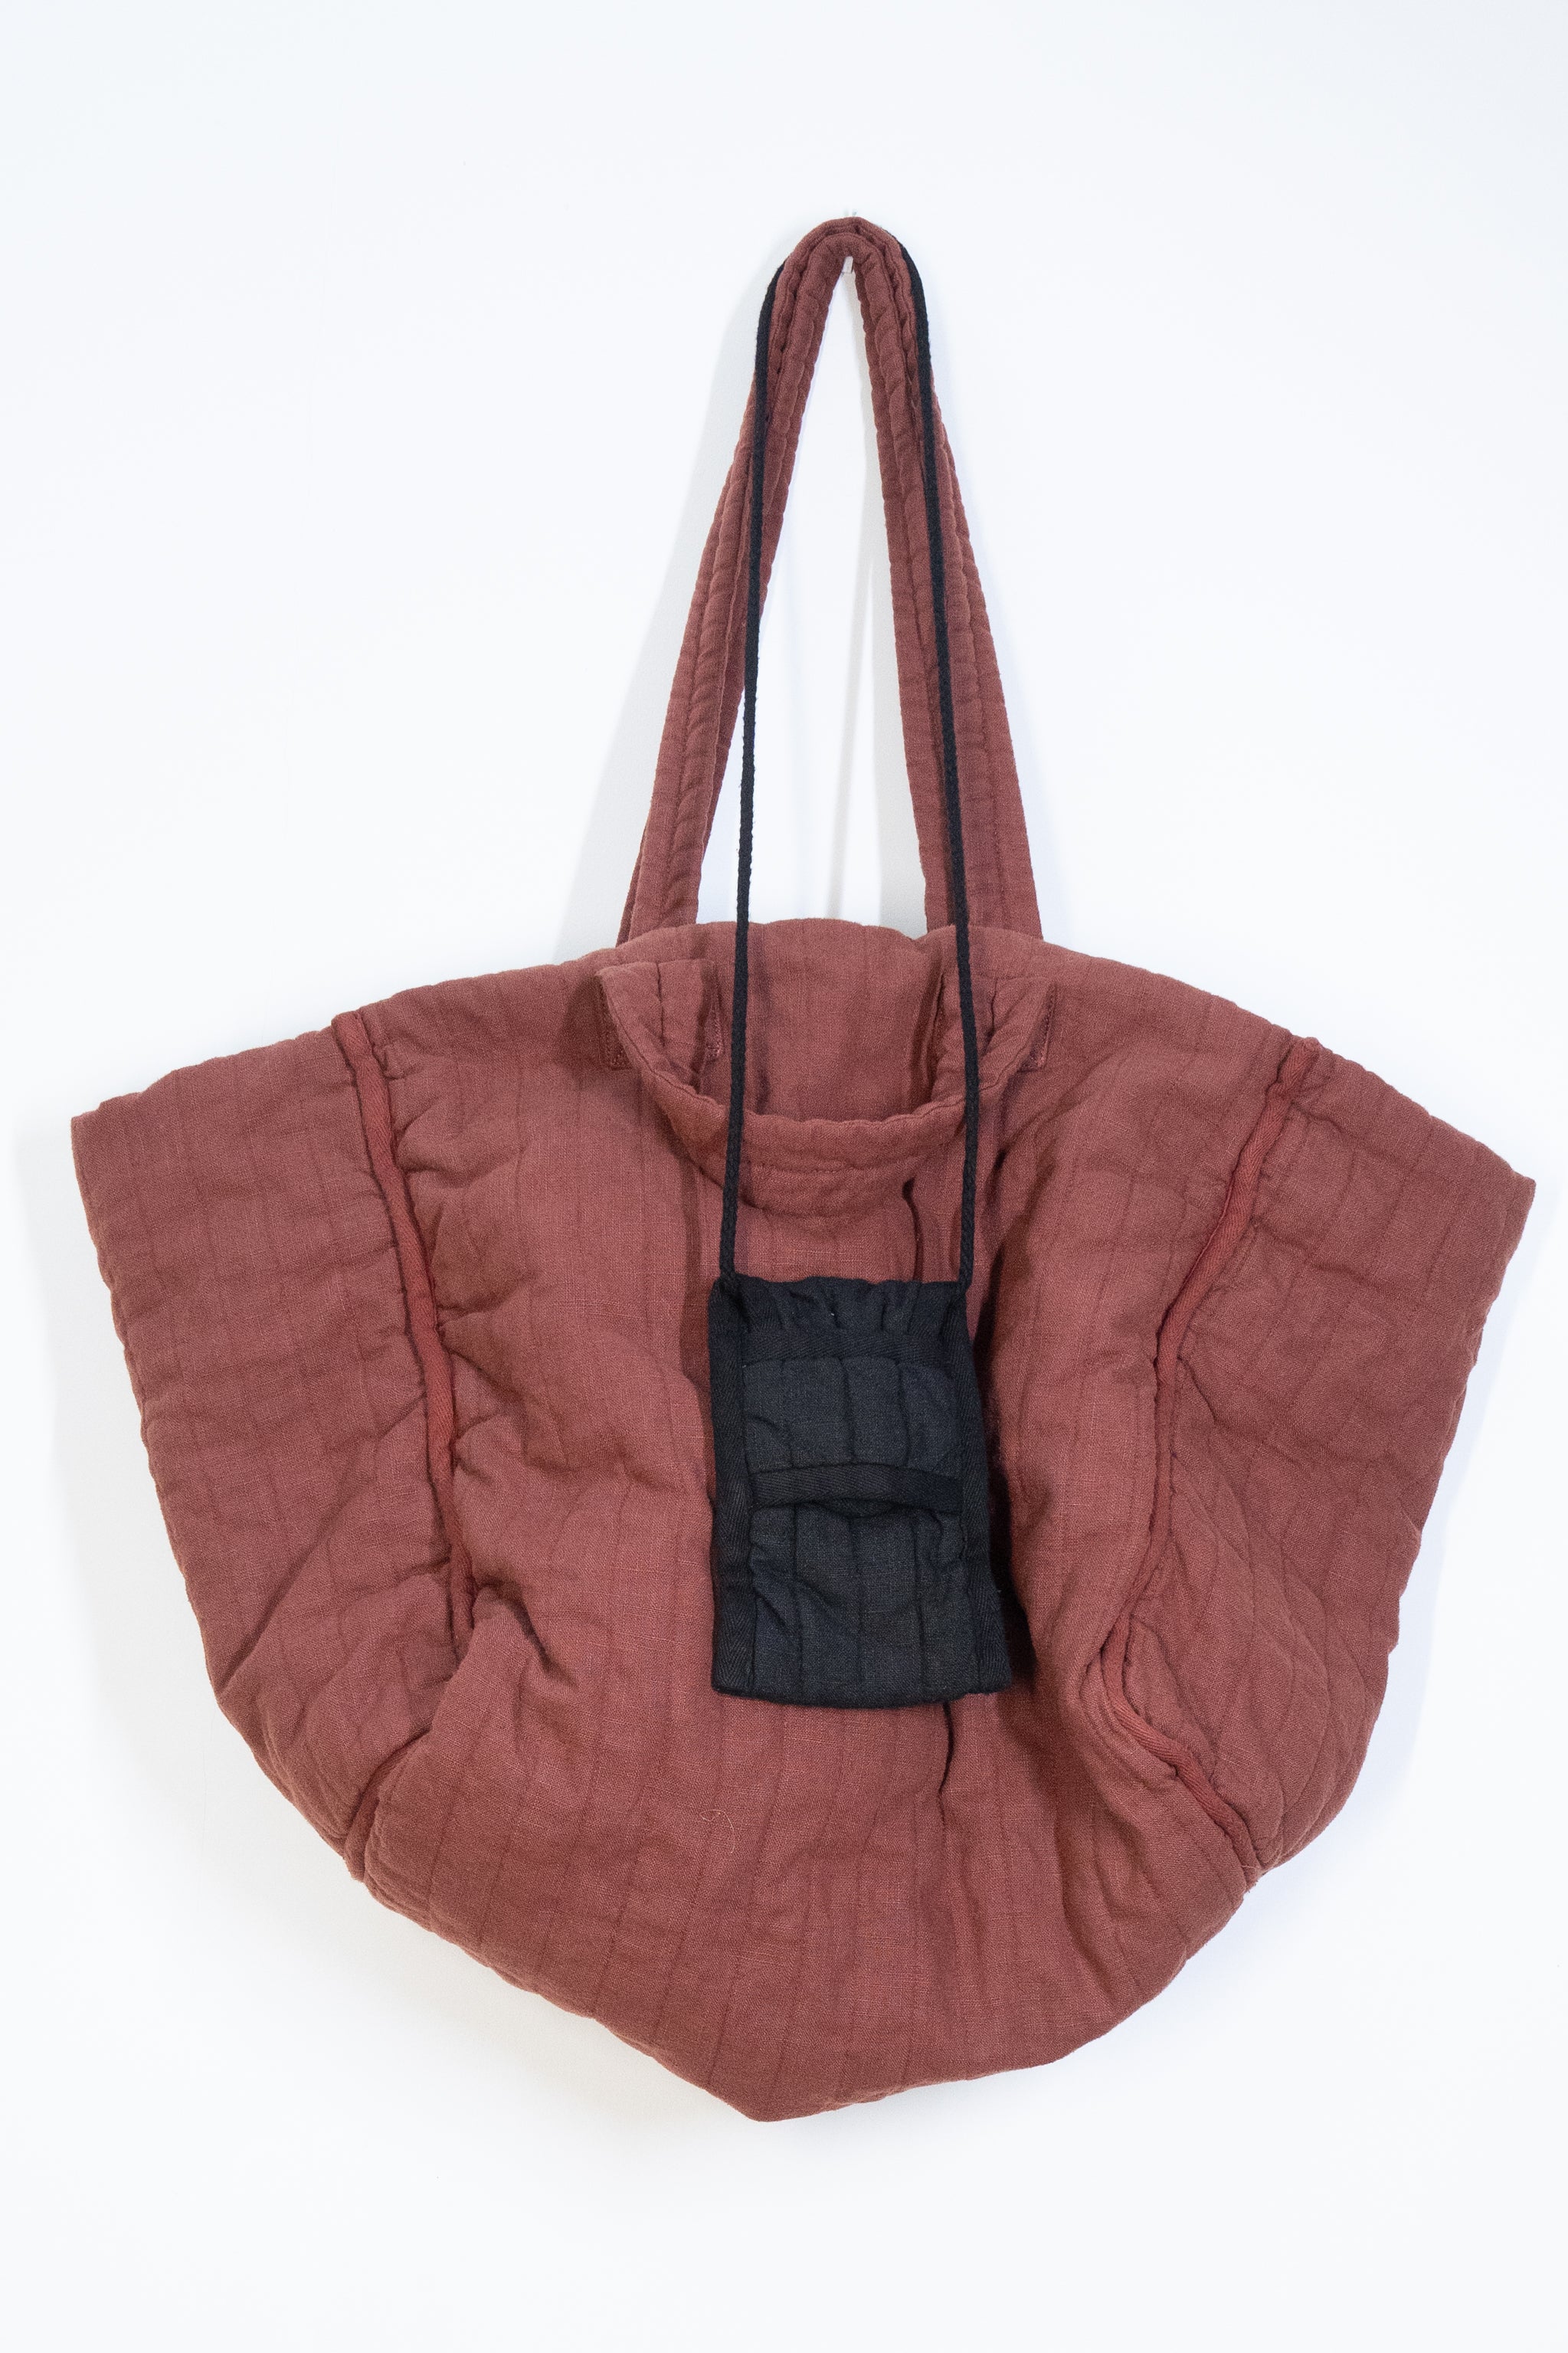 Supersized quilted tote in rosewood linen hung with smaller quilted pocket bag in black linen.  Both from THE REGULAR lifestyle brand